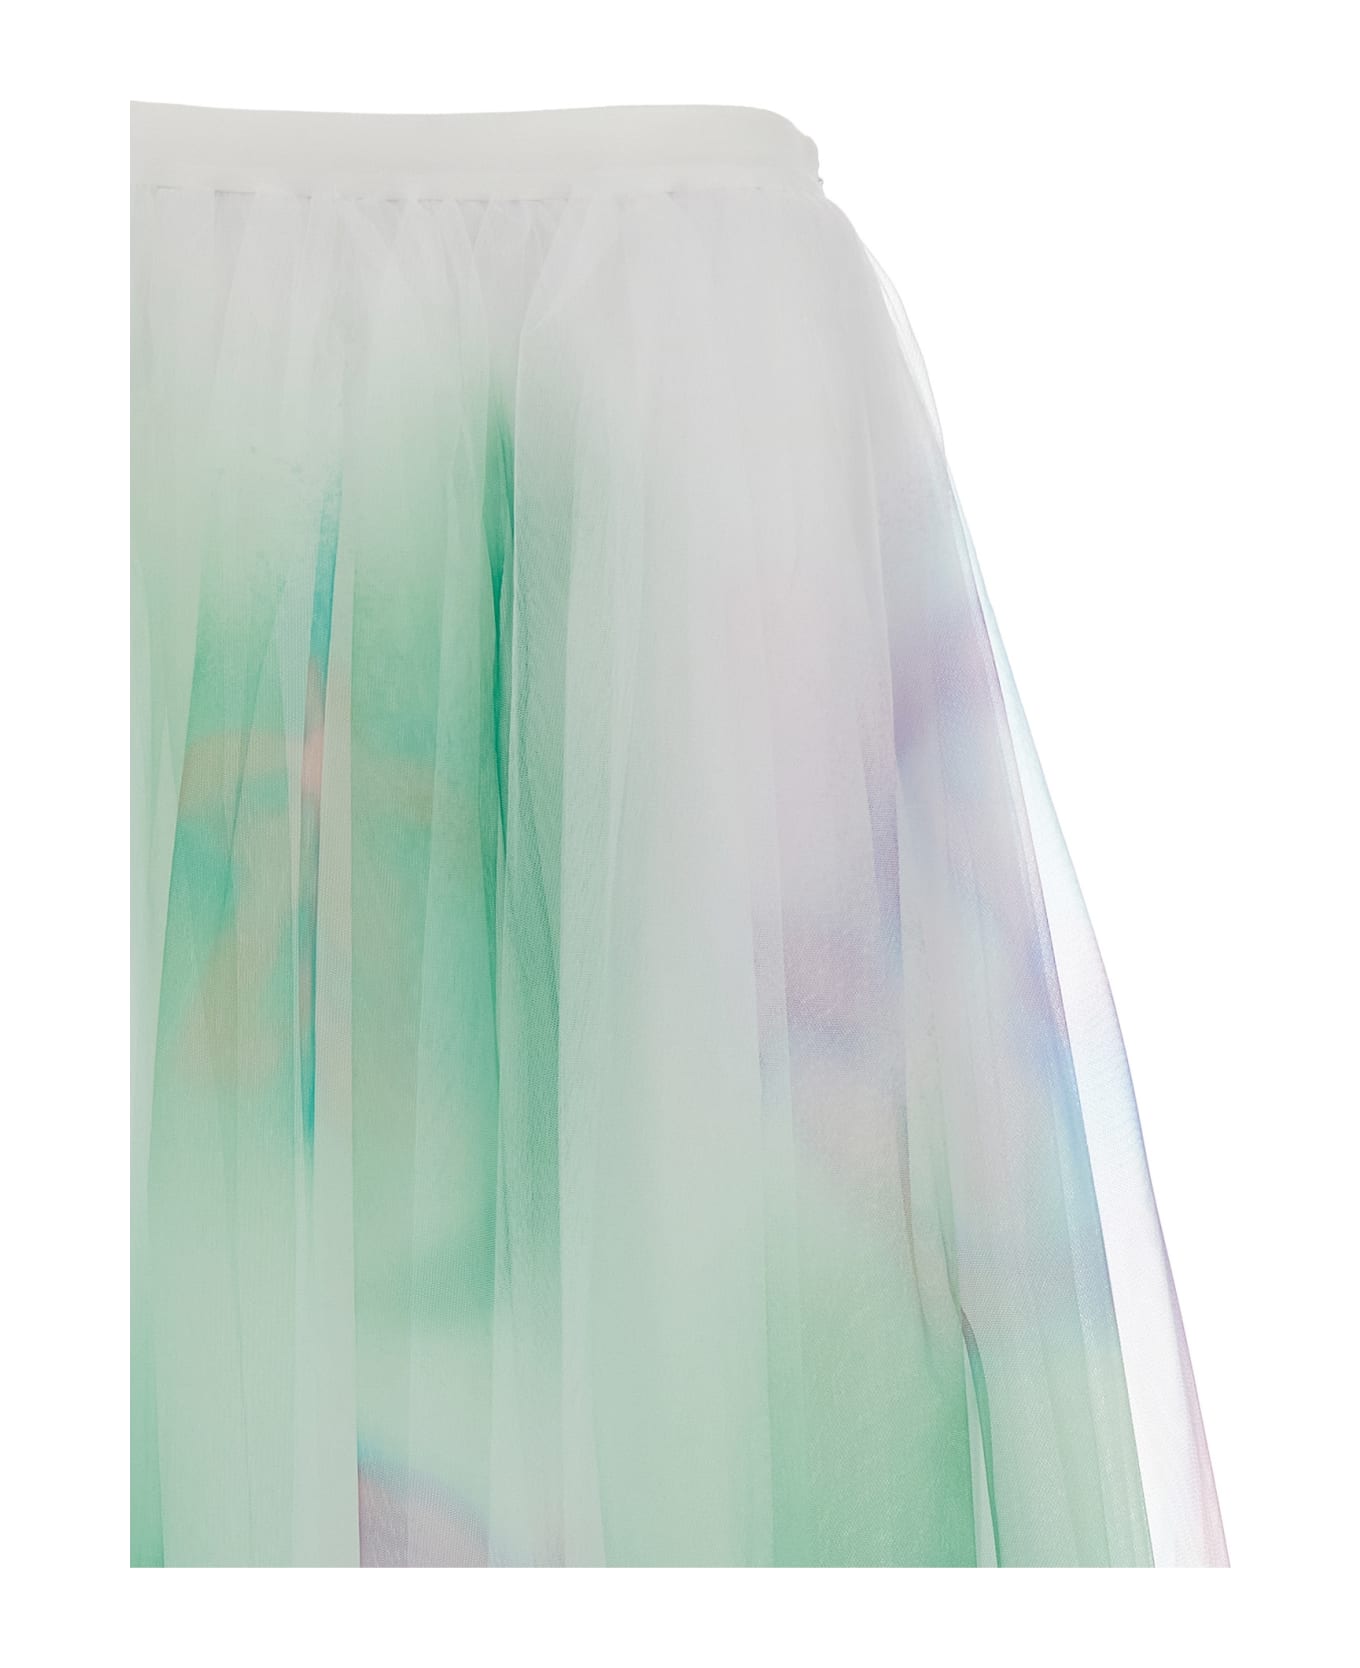 TwinSet Multicolor Tulle Skirt - Multicolor スカート